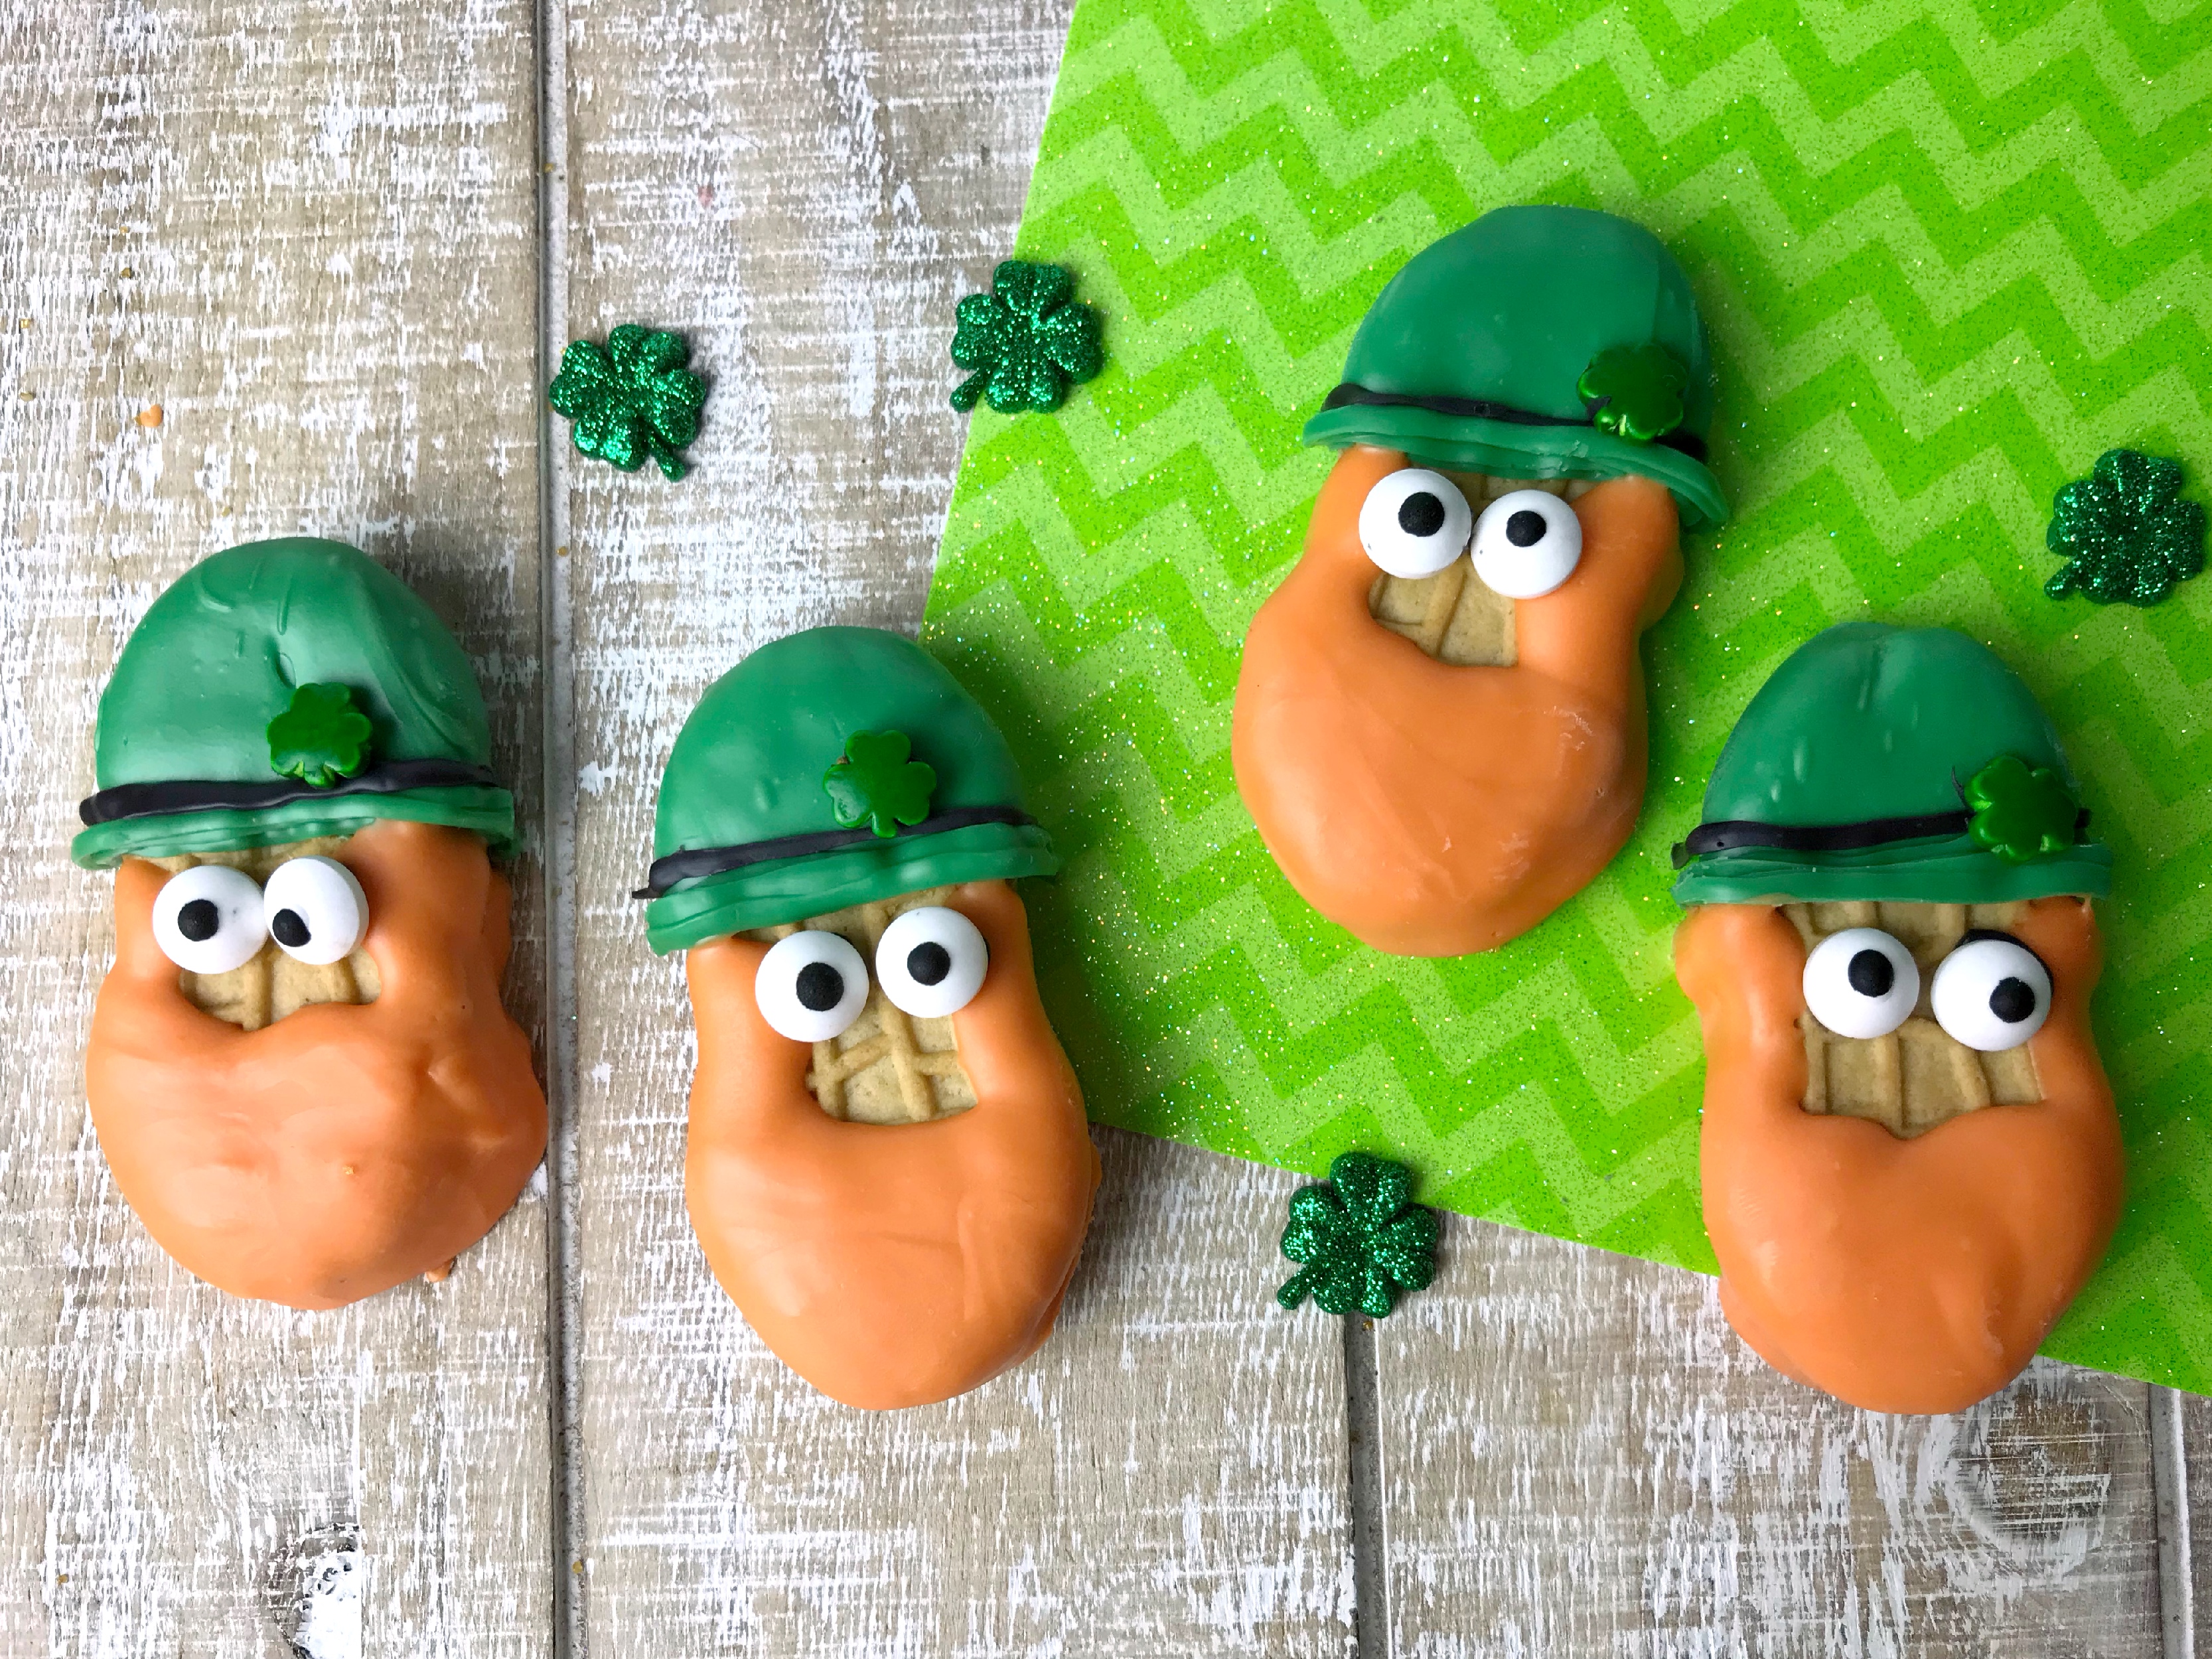 If you want the cutest St Patrick's Day cookies, you want to make these adorable Leprechaun Cookies made with Nutter Butters. These cookies look so cute and they are super easy to make. Perfect for a St. Patrick's  Day party for kids and adults alike.